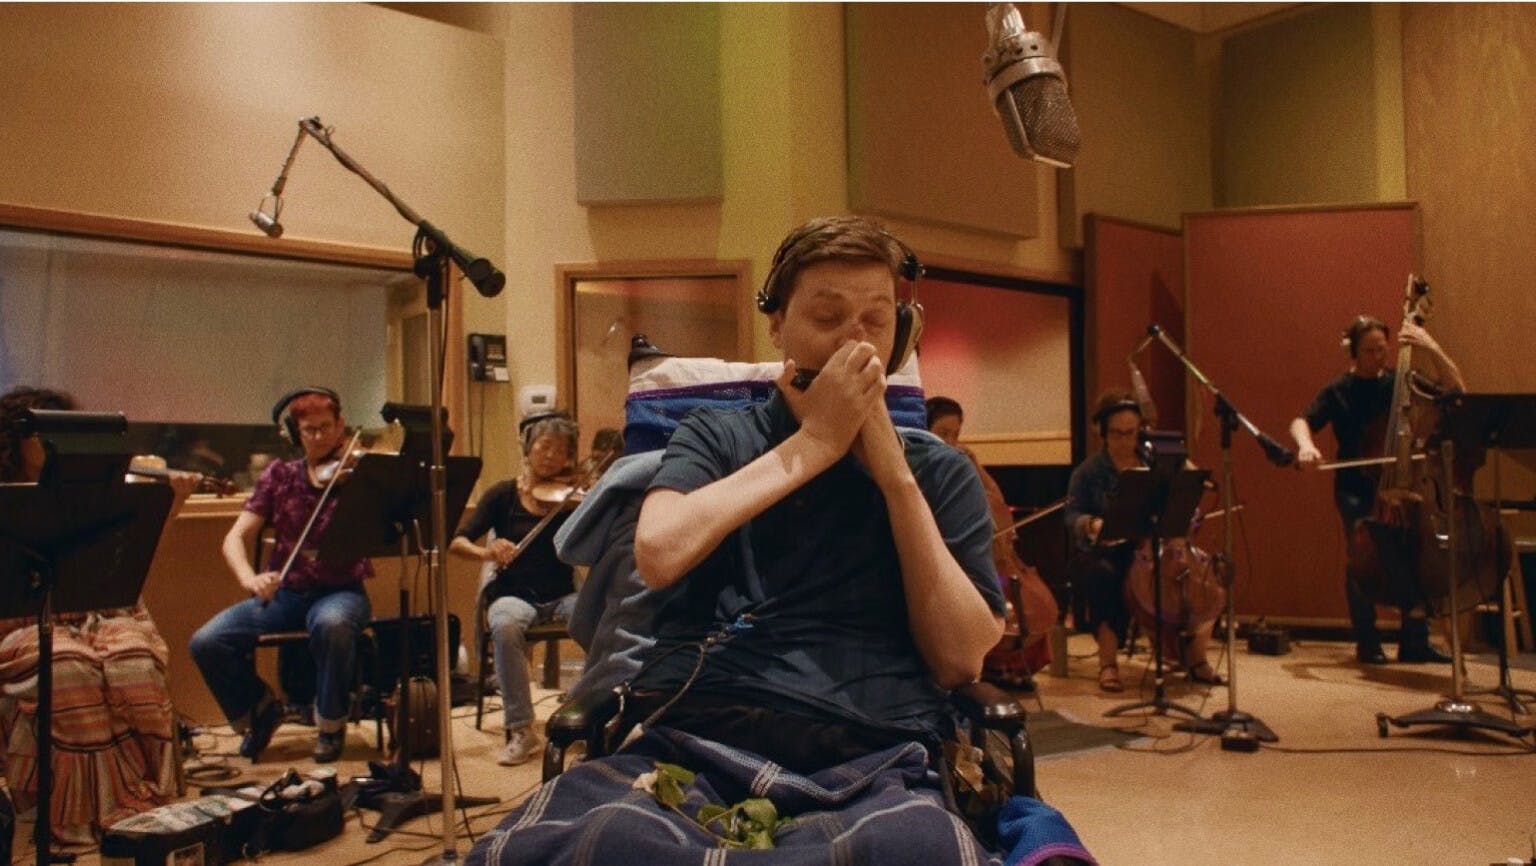 Mac playing the harmonica in front of the studio orchestra during a recording session.